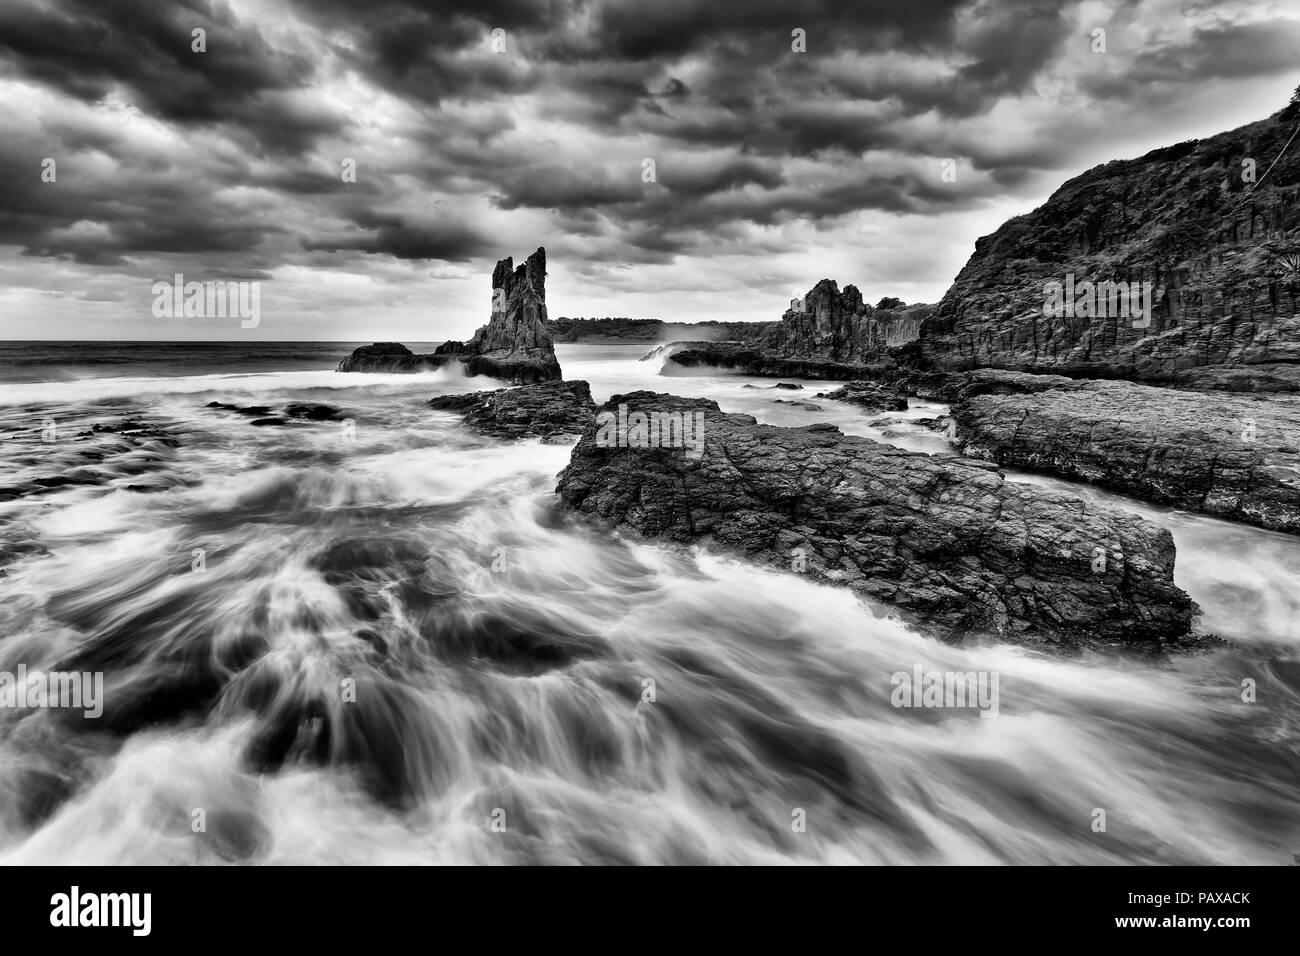 Eroded golden sandstone cathedral rocks at Bombo beach in Kiama, NSW, Australia, at stormy sunset under cloudy sky in black white. Stock Photo